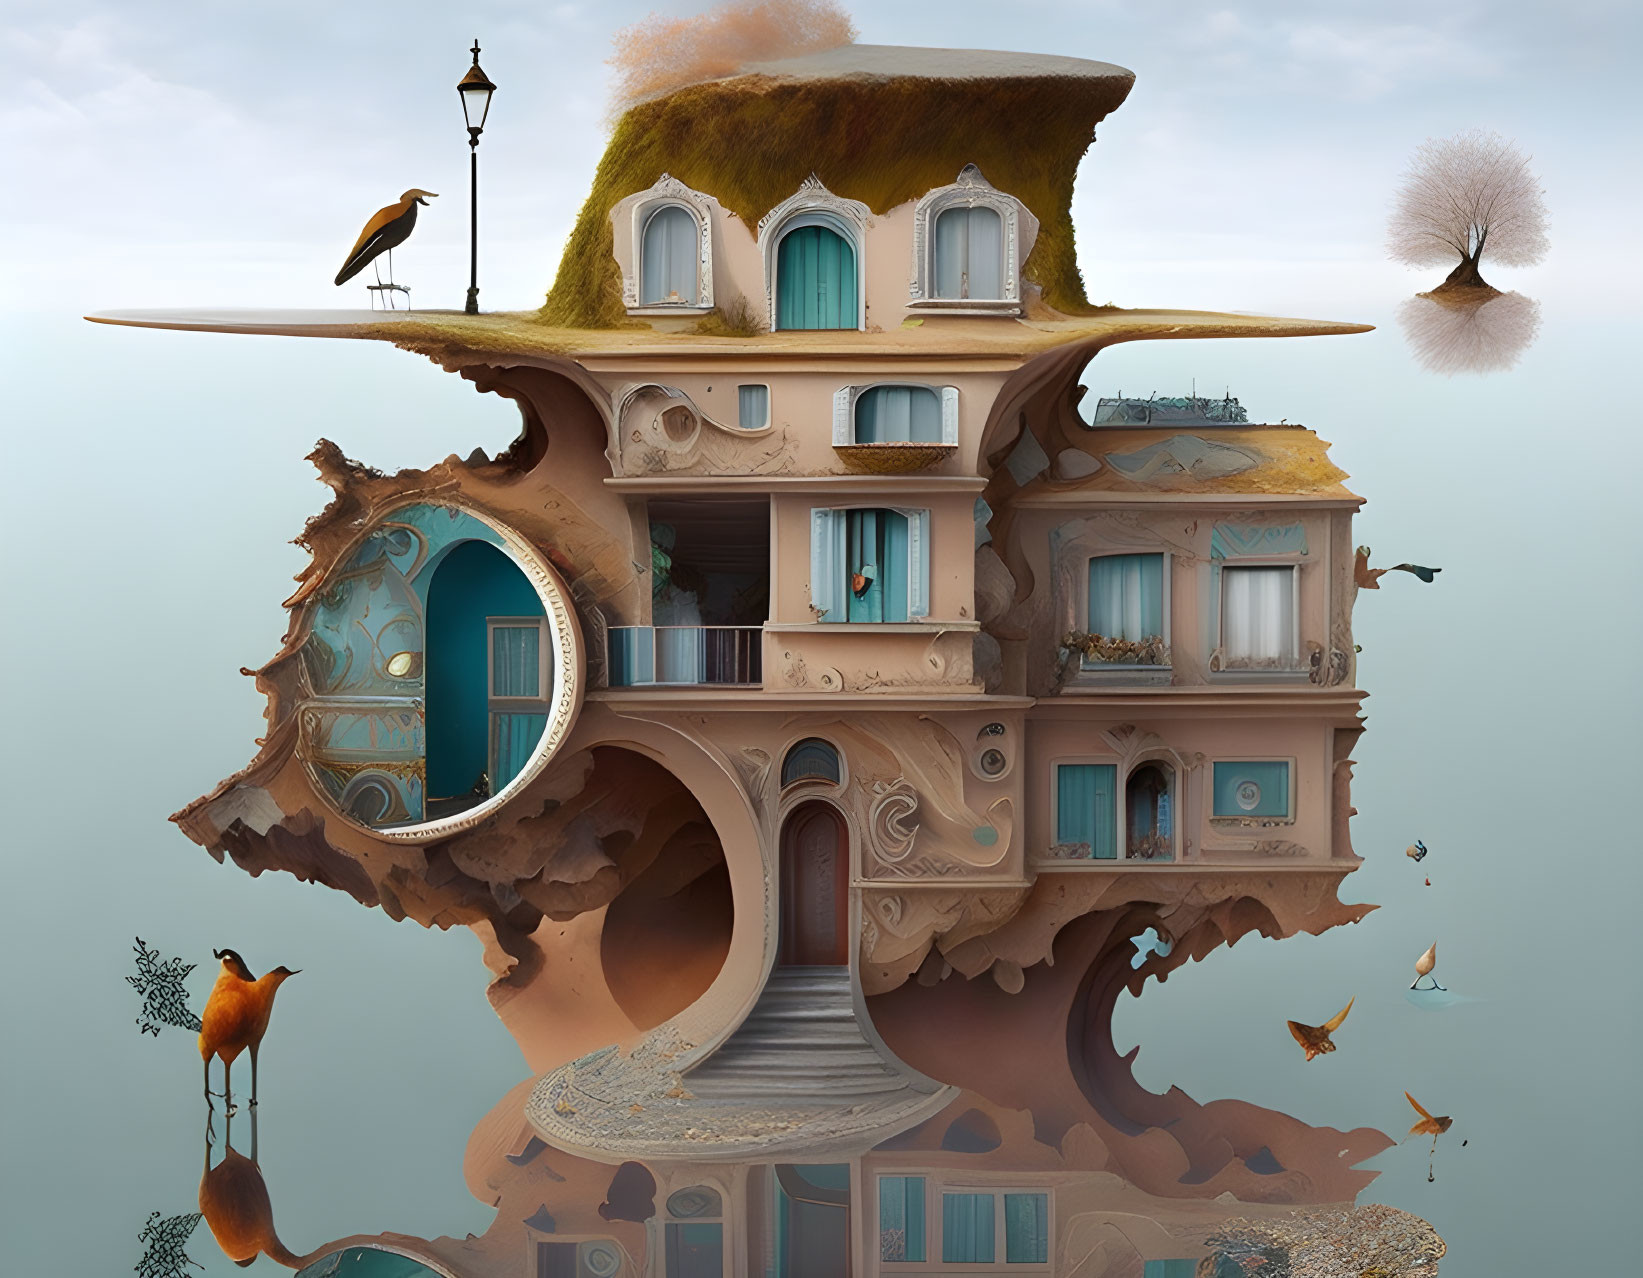 Whimsical floating building with organic curves and birds